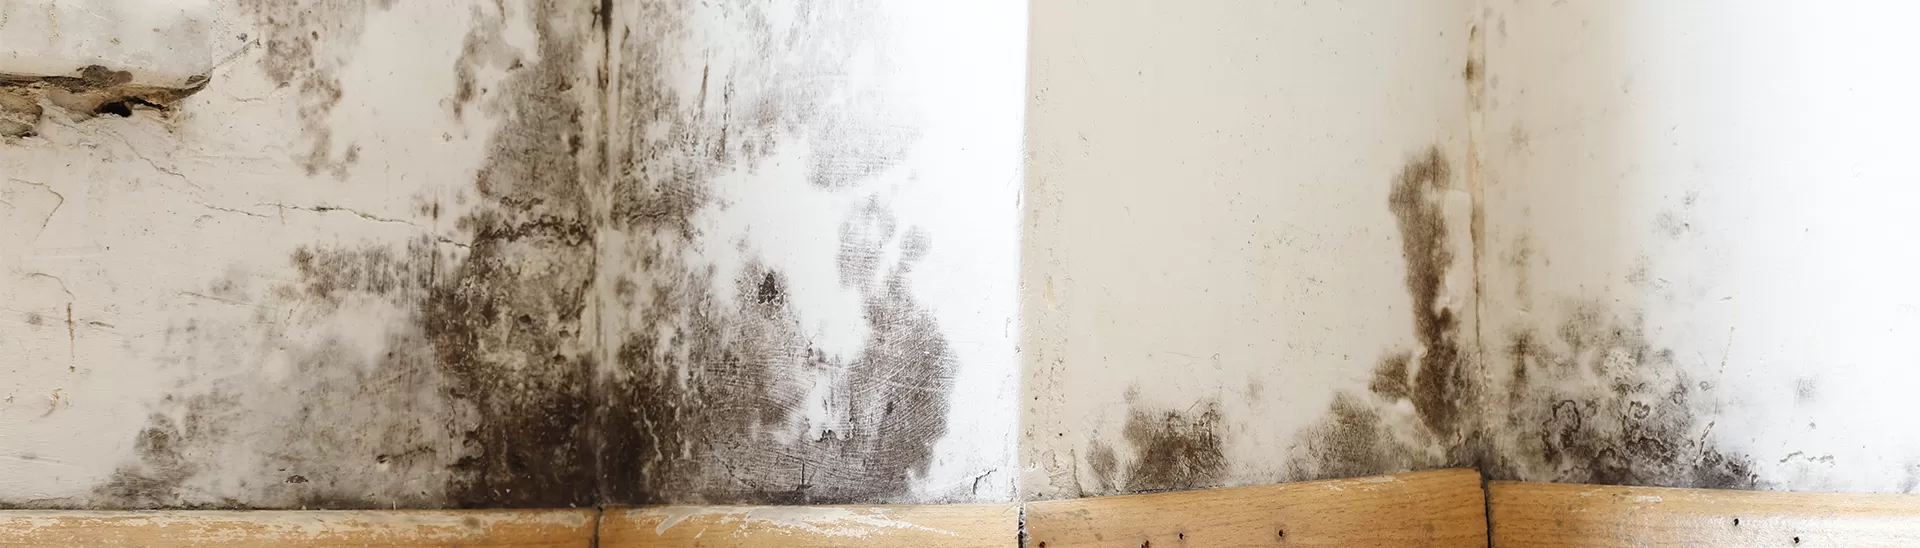 Wall Seepage: 10 Effective Tips and Tricks to Prevent It for Monsoons